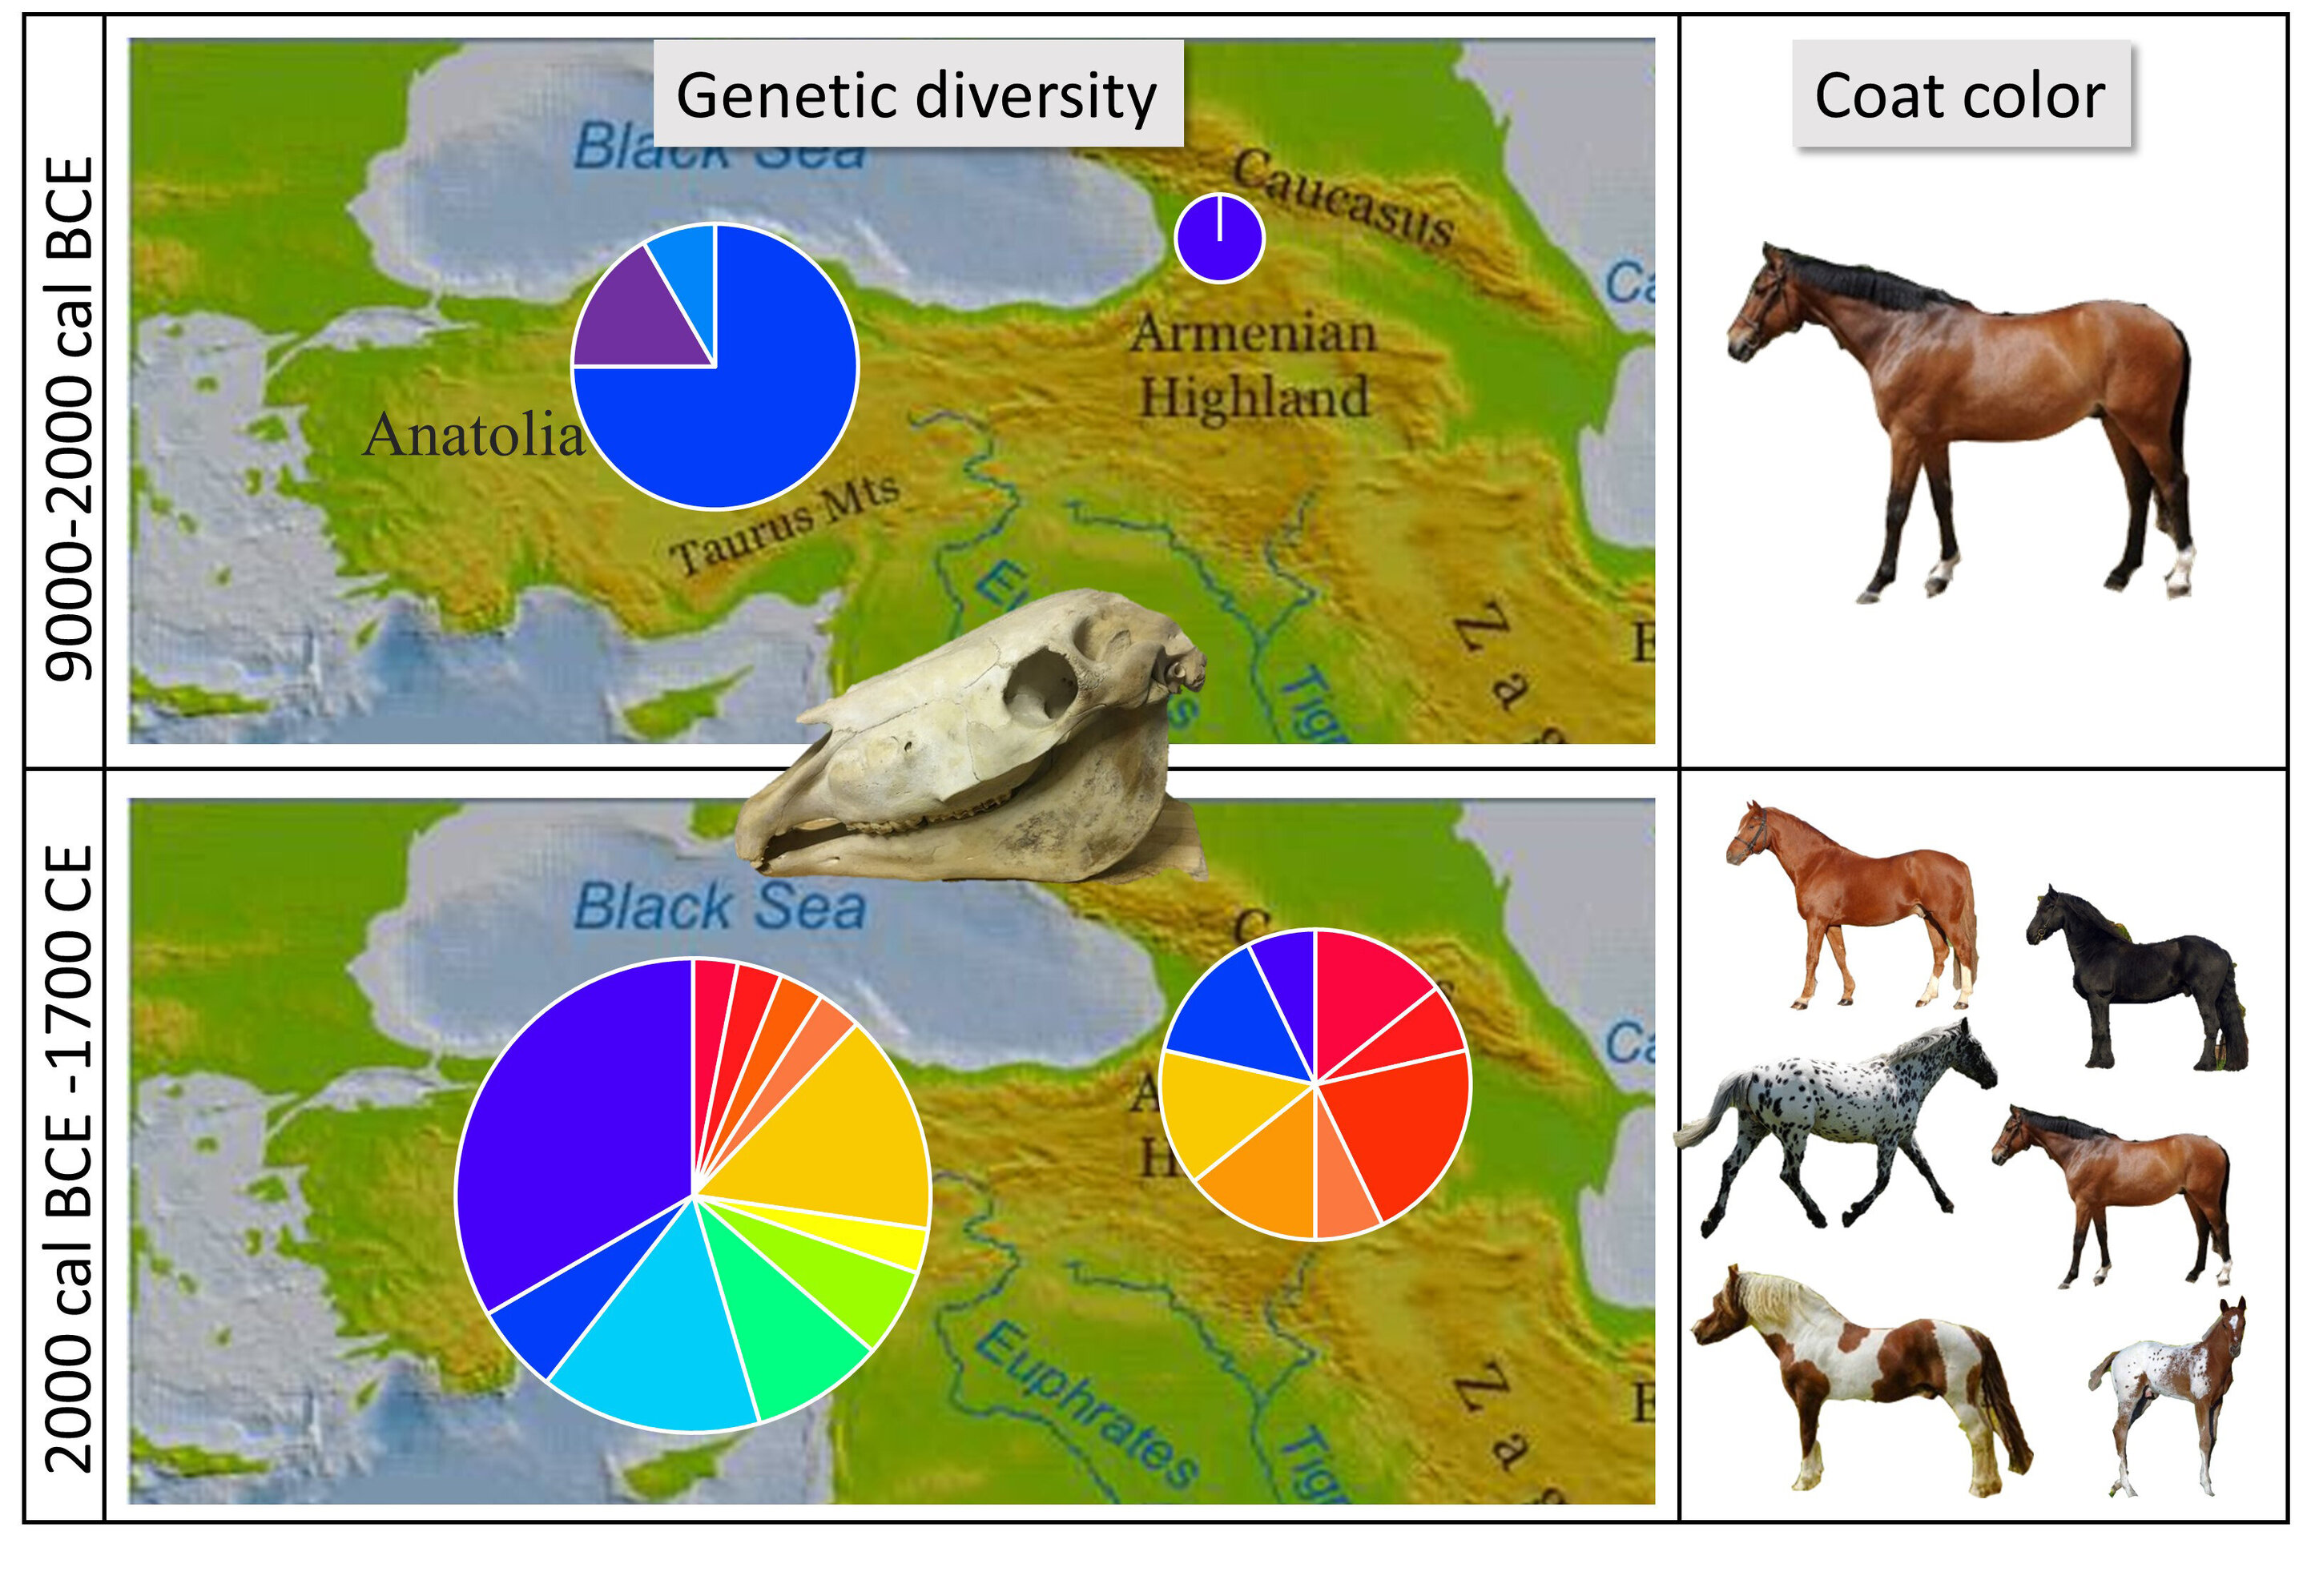 Genetic testing suggests horse domestication did not begin in Anatolia